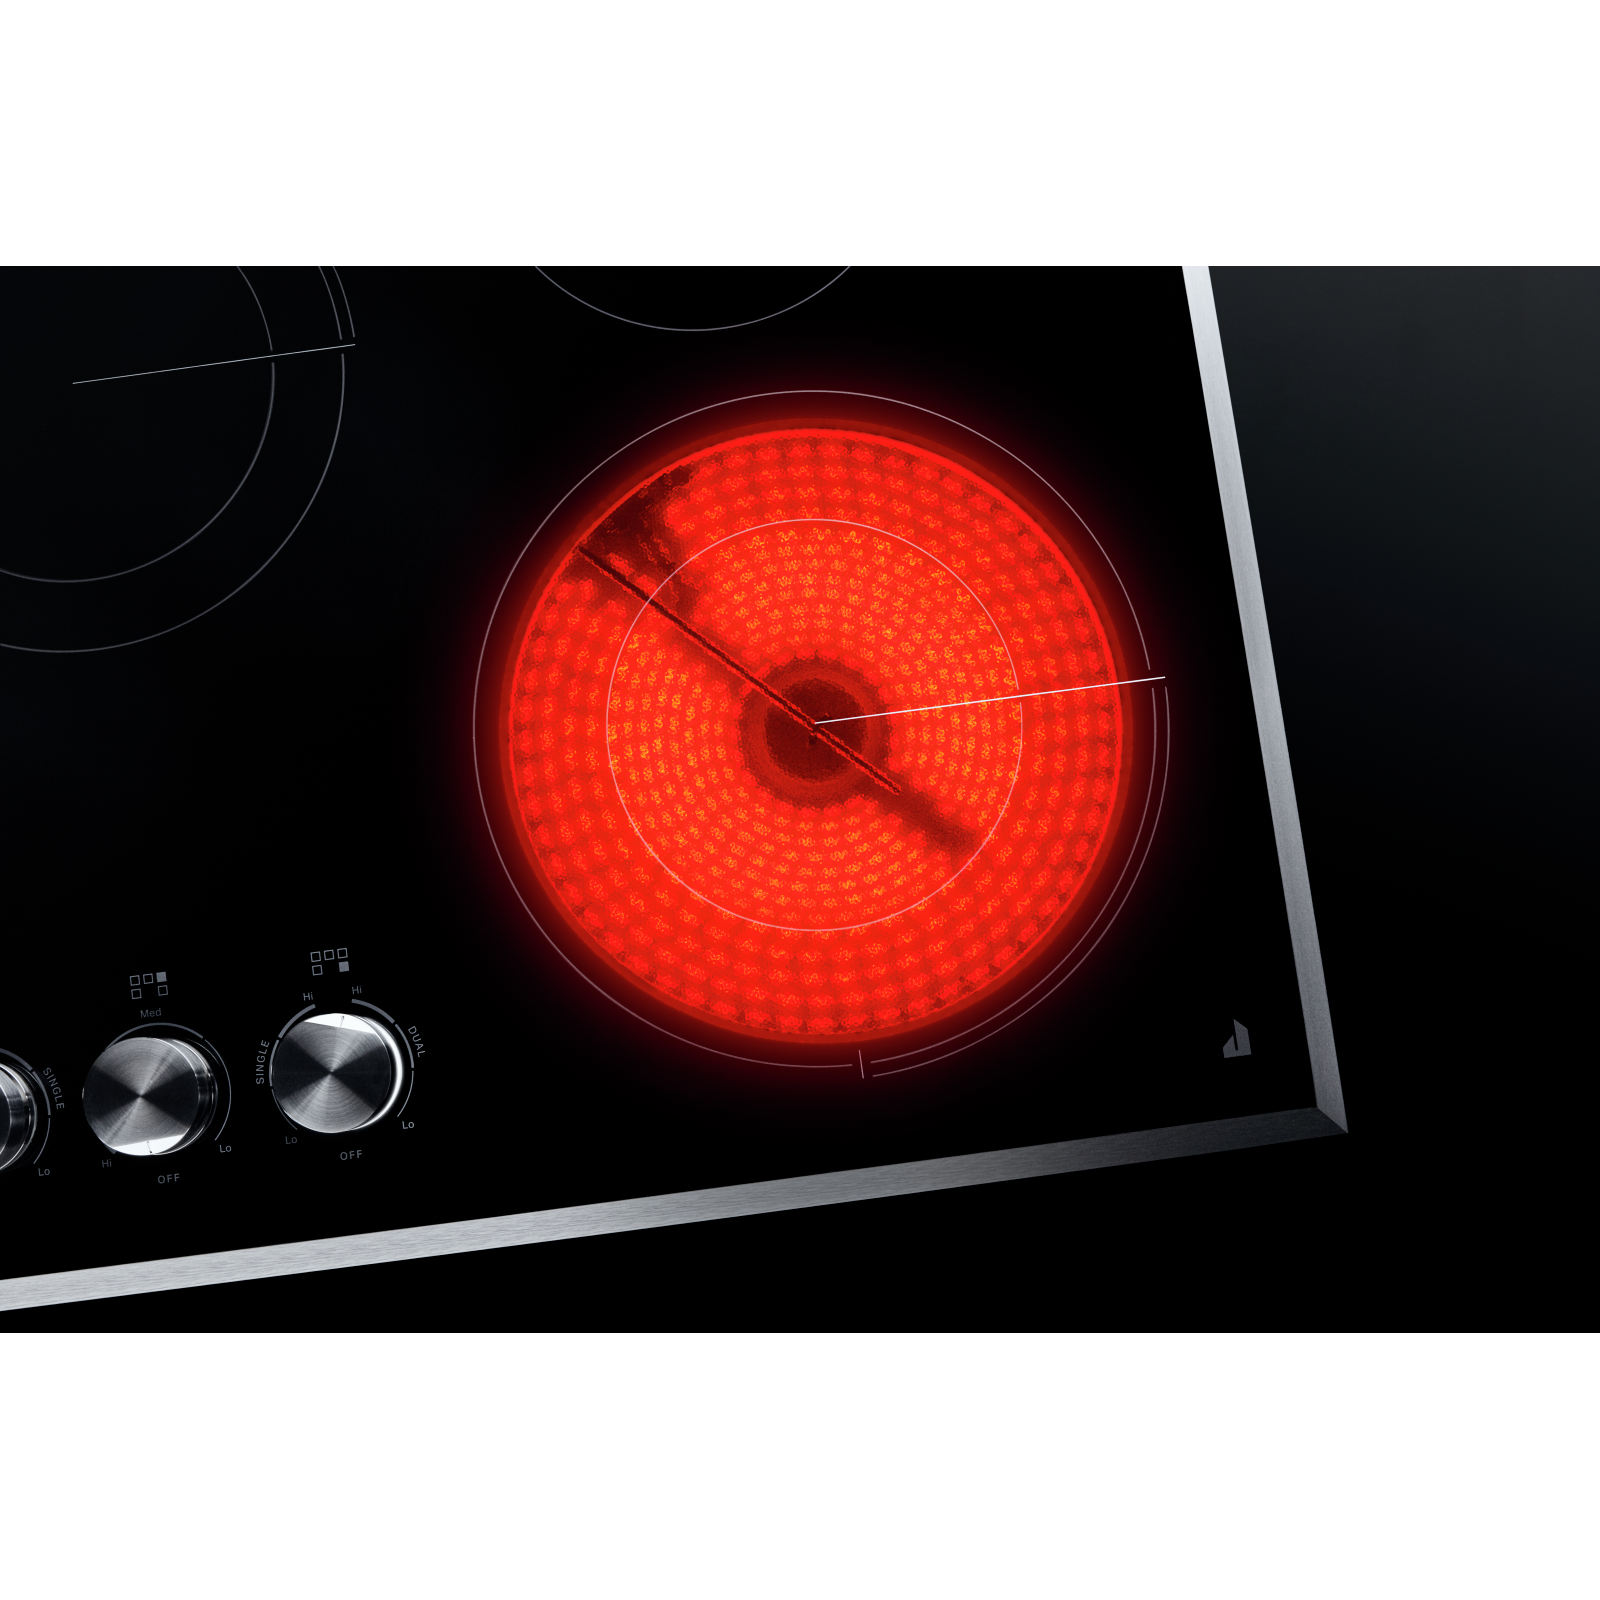 JennAir - 30.8125 inch wide Electric Cooktop in Black - JEC3430HB